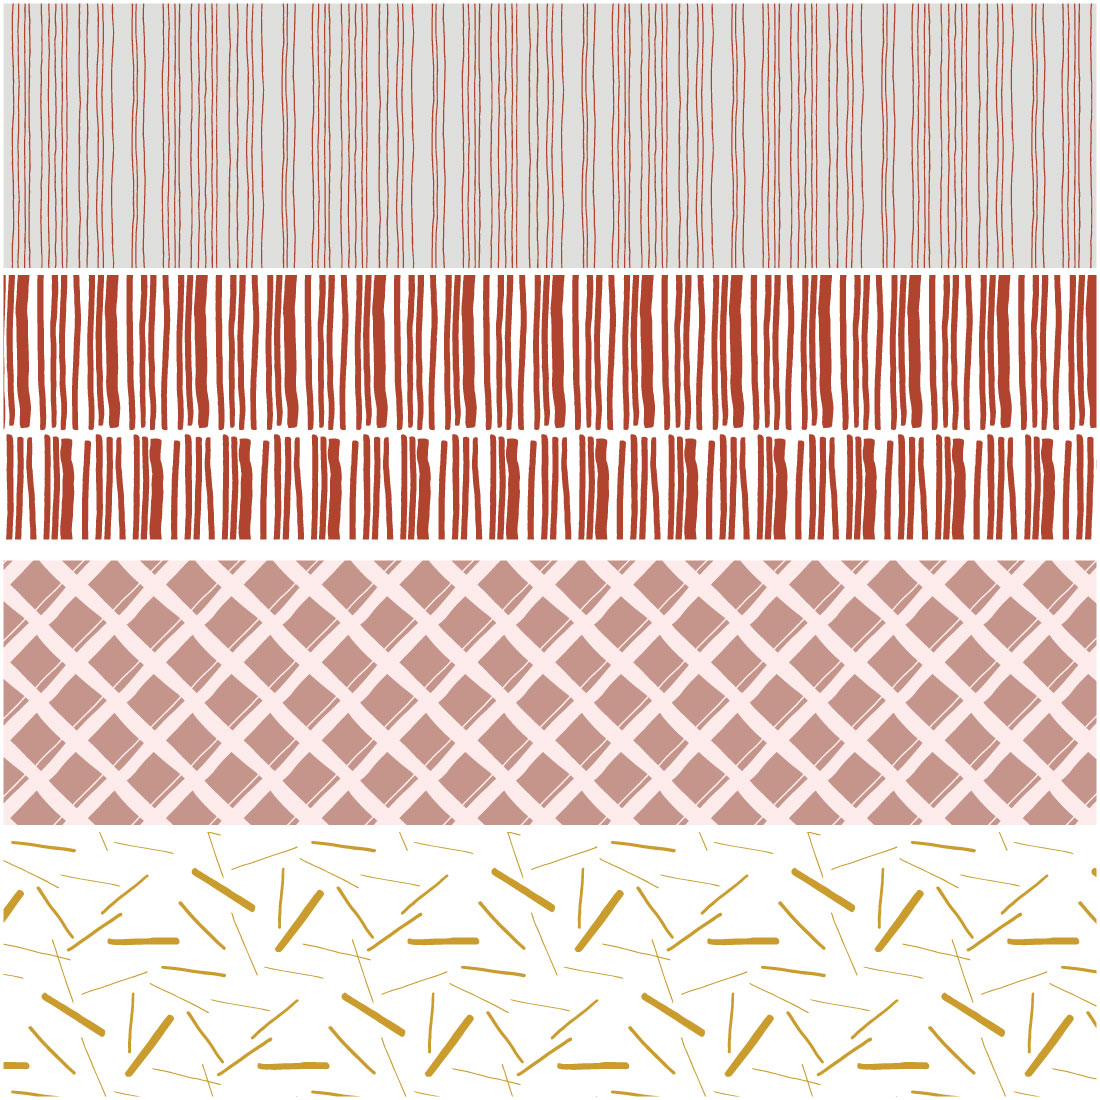 Sunset Lines Hand Drawn Patterns cover image.